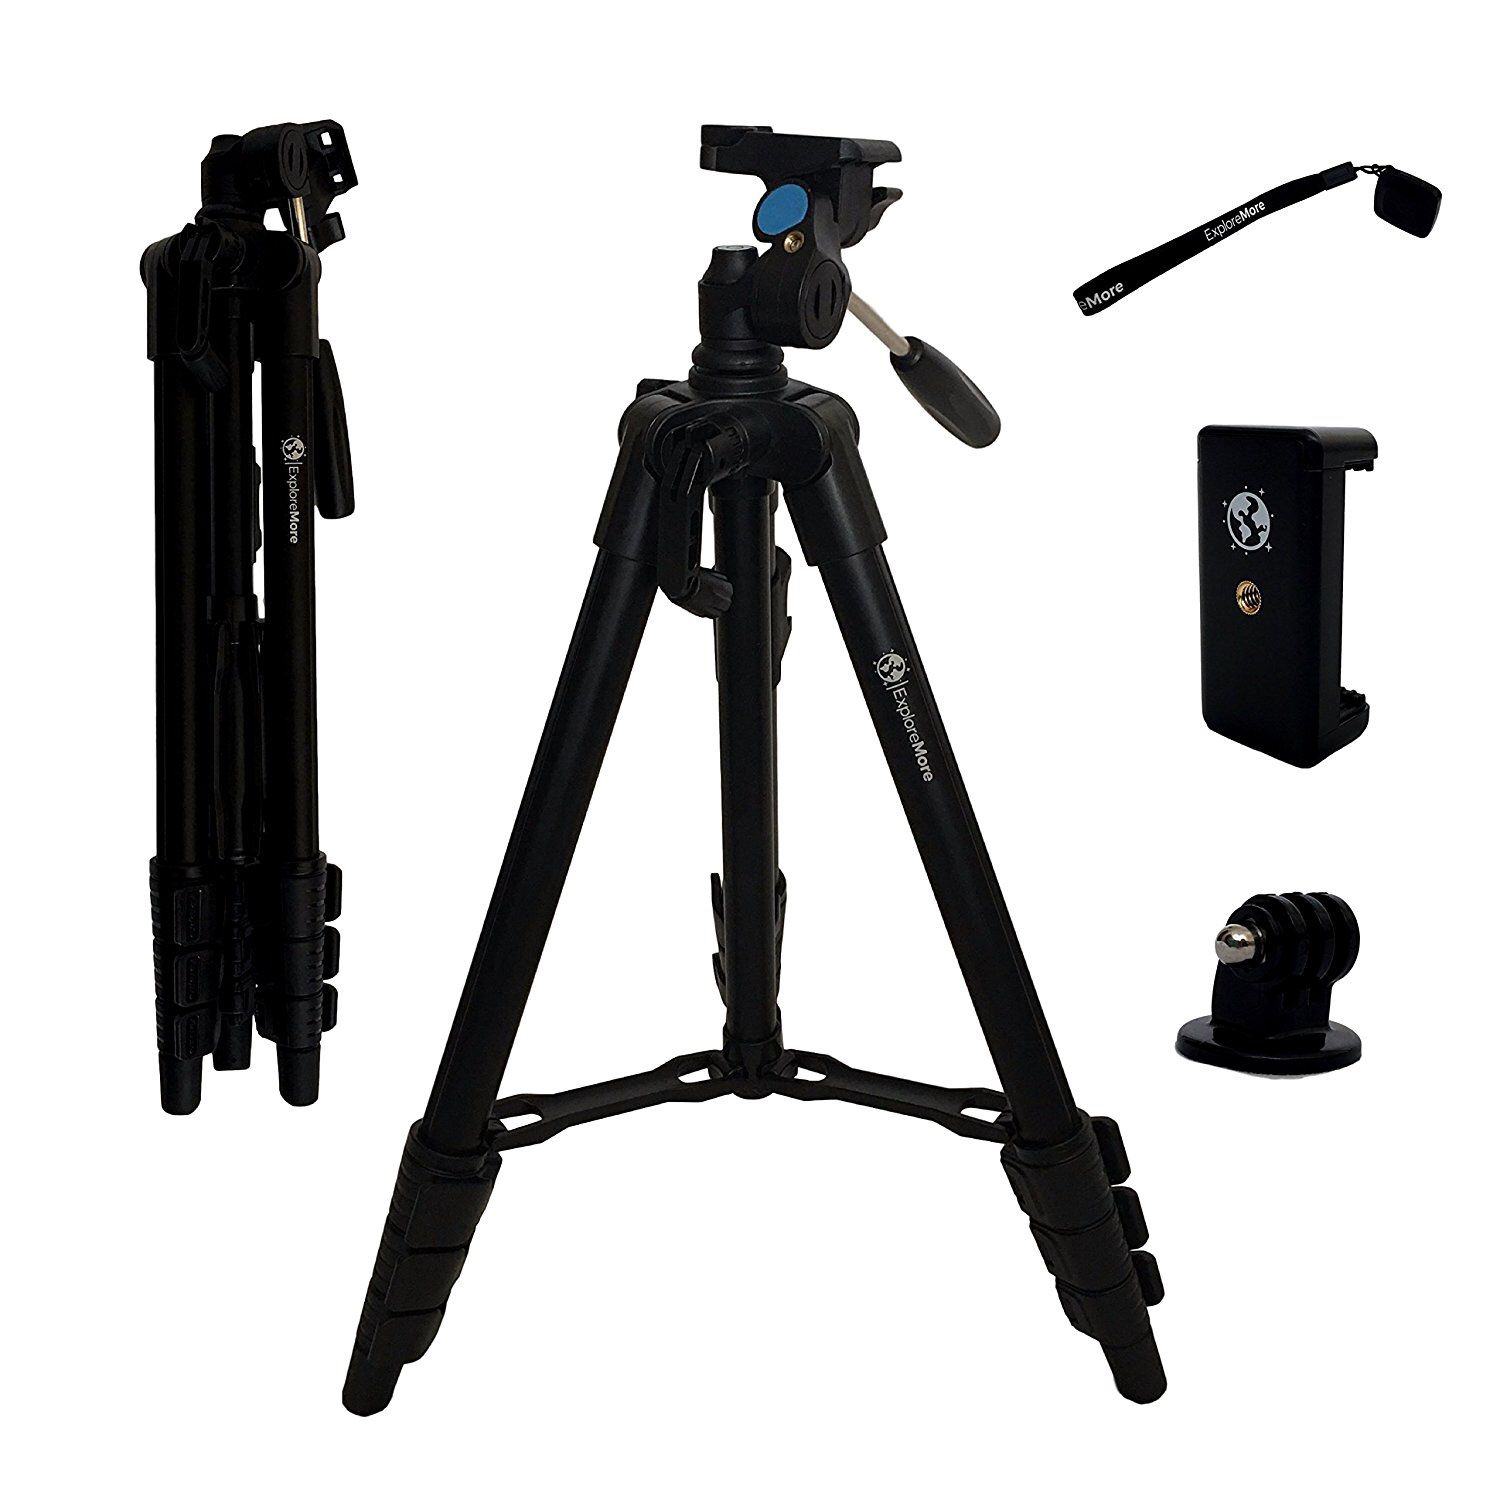 Lightweight Travel Tripod 3-in-1 for Camera, iPhone, Android, GoPro & DSLR w/ Bluetooth Remote, Phone Mount & Carrying Bag | iPhone X, 8, 7, & 6 Plus